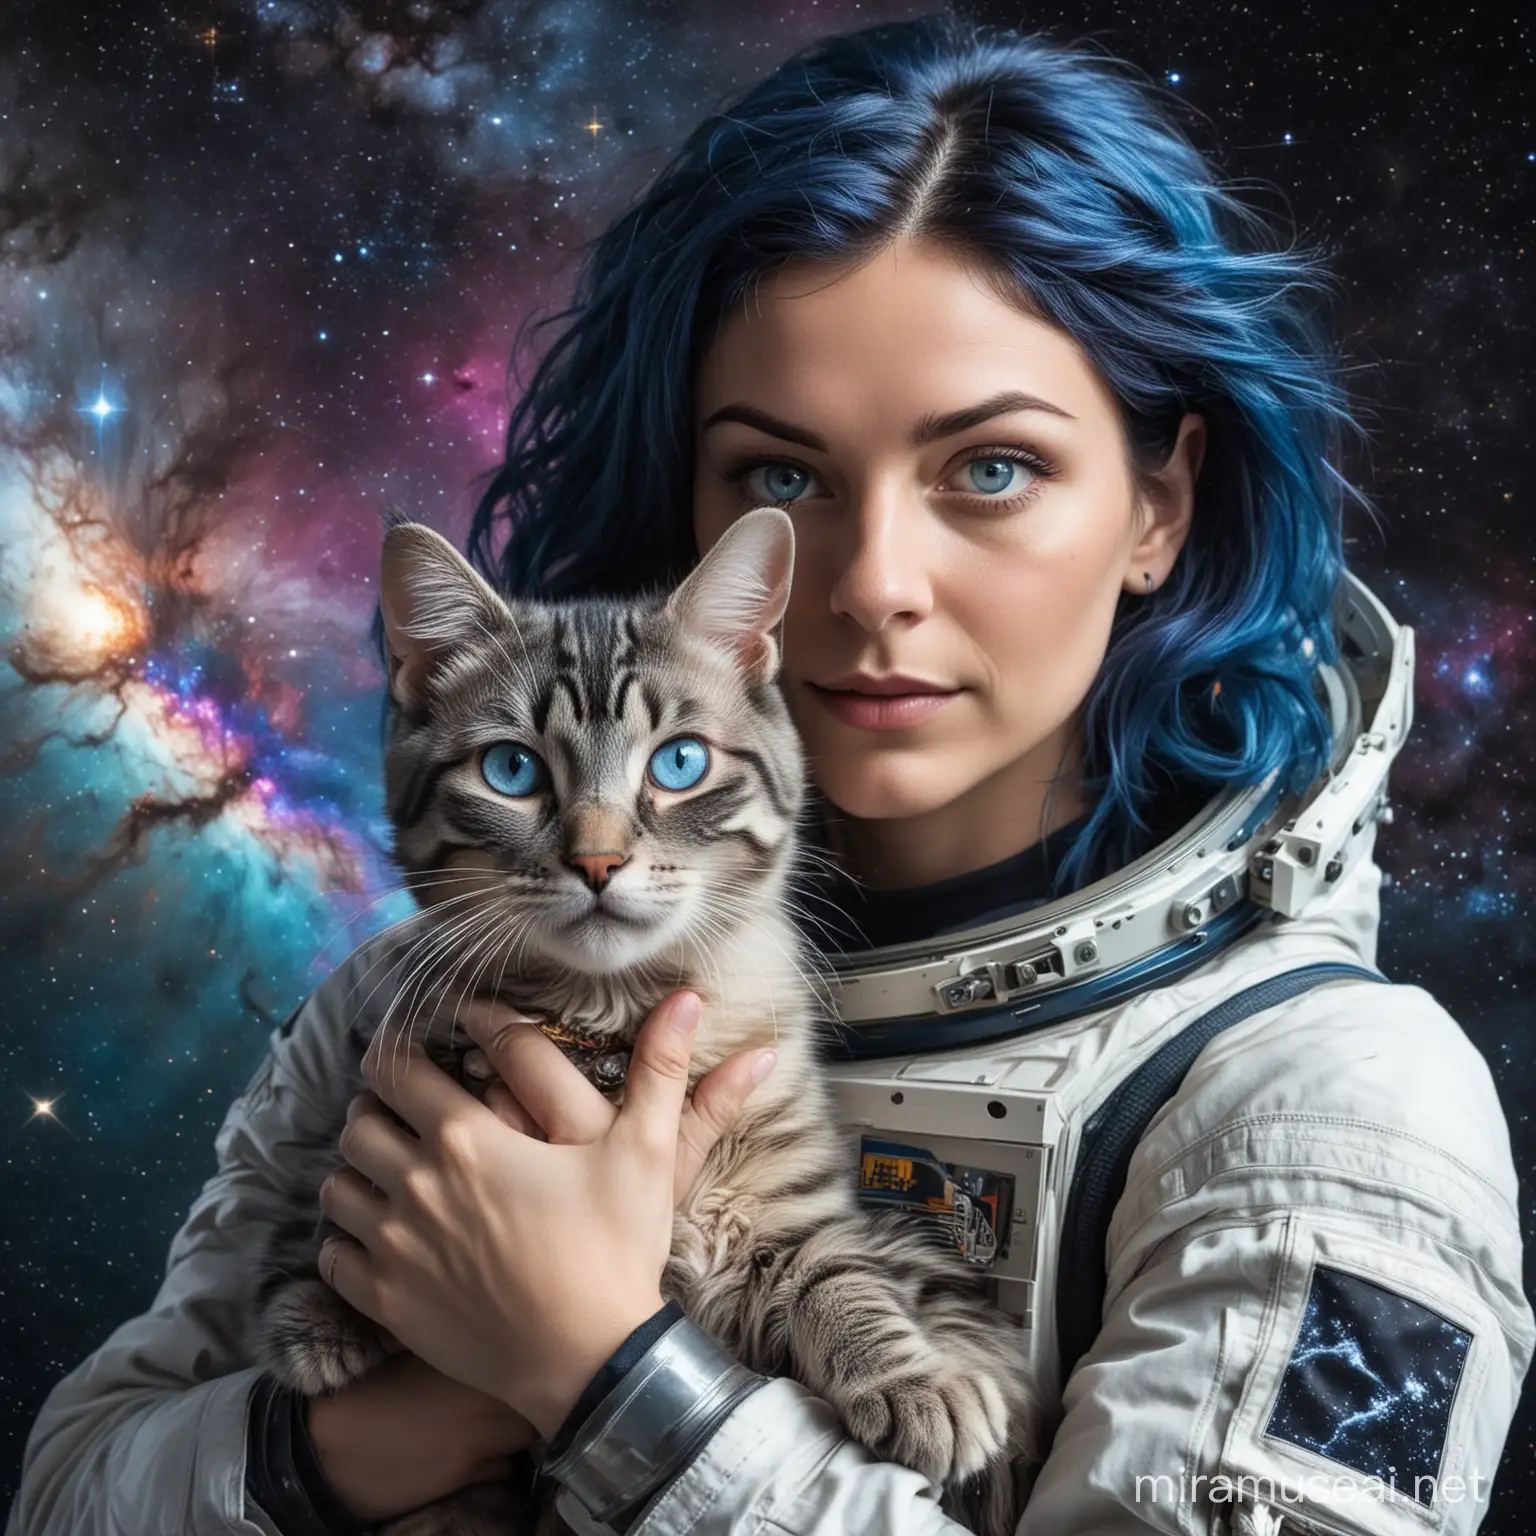 Caucasian woman with dark blue hair and blue eyes in space holding a tabby cat